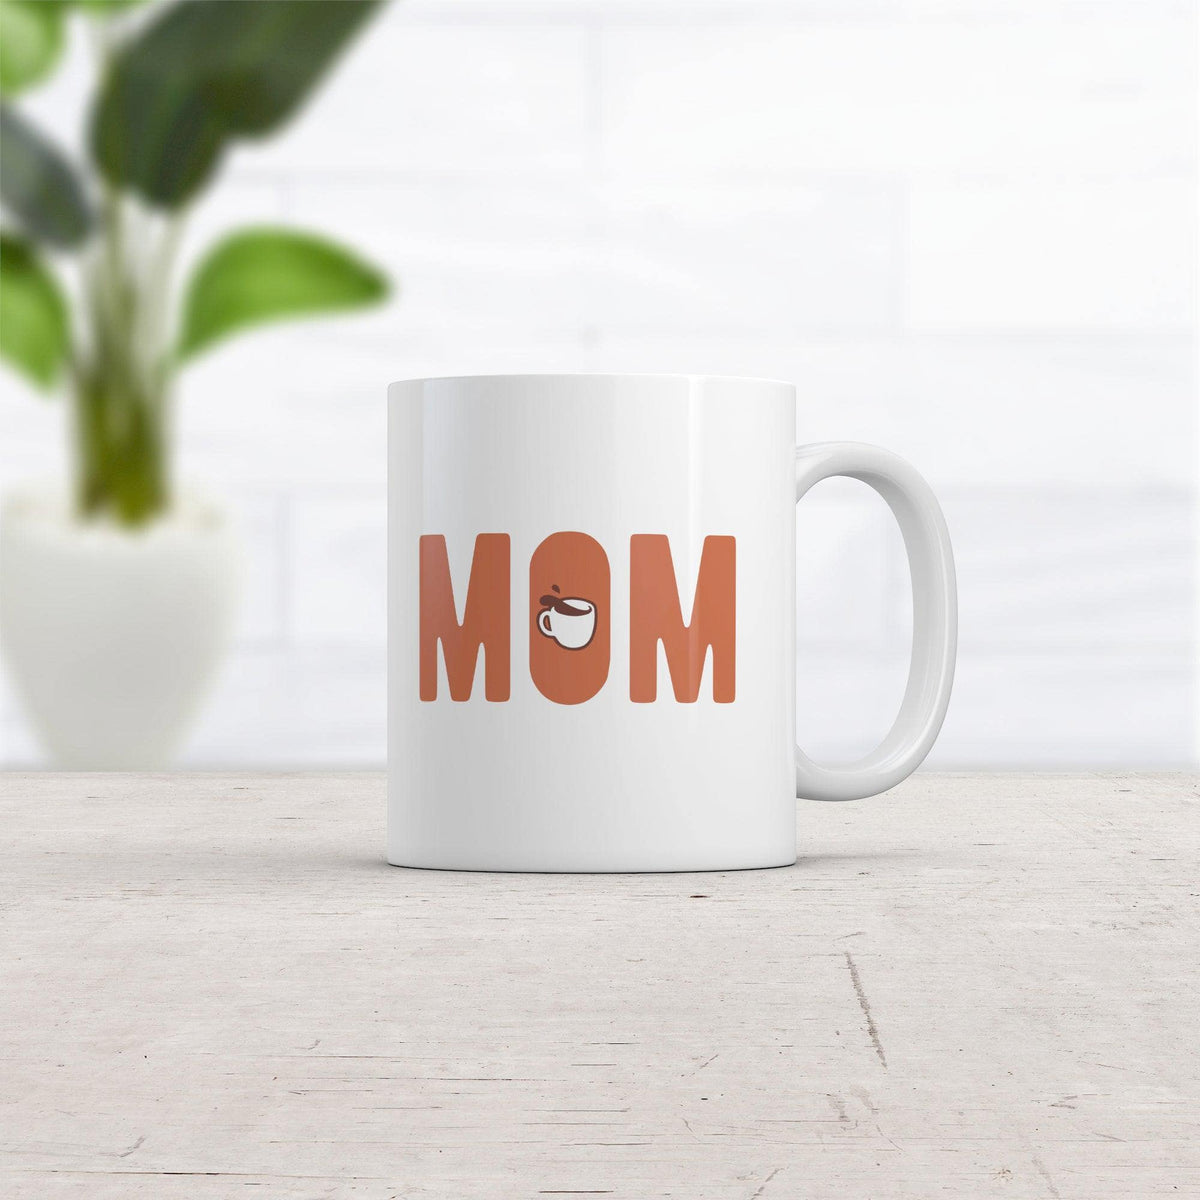 Mom Coffee Mug Funny Cool Mother&#39;s Day Gift Caffeine Lovers Graphic Novelty Cup-11oz  -  Crazy Dog T-Shirts